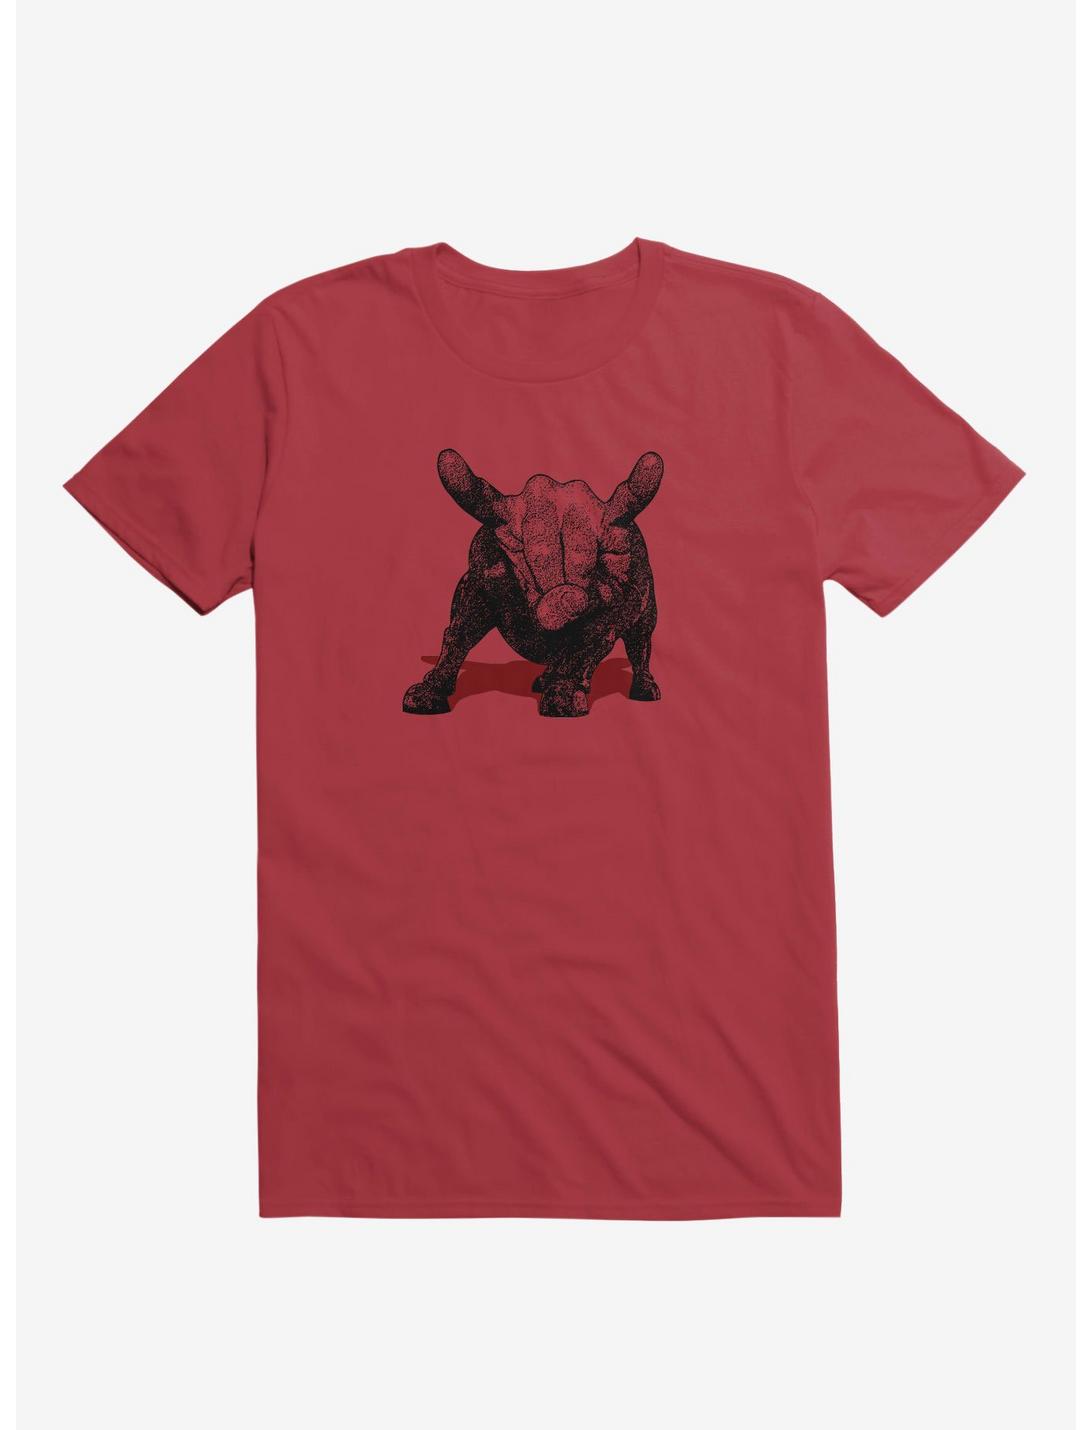 Party Animal T-Shirt, RED, hi-res